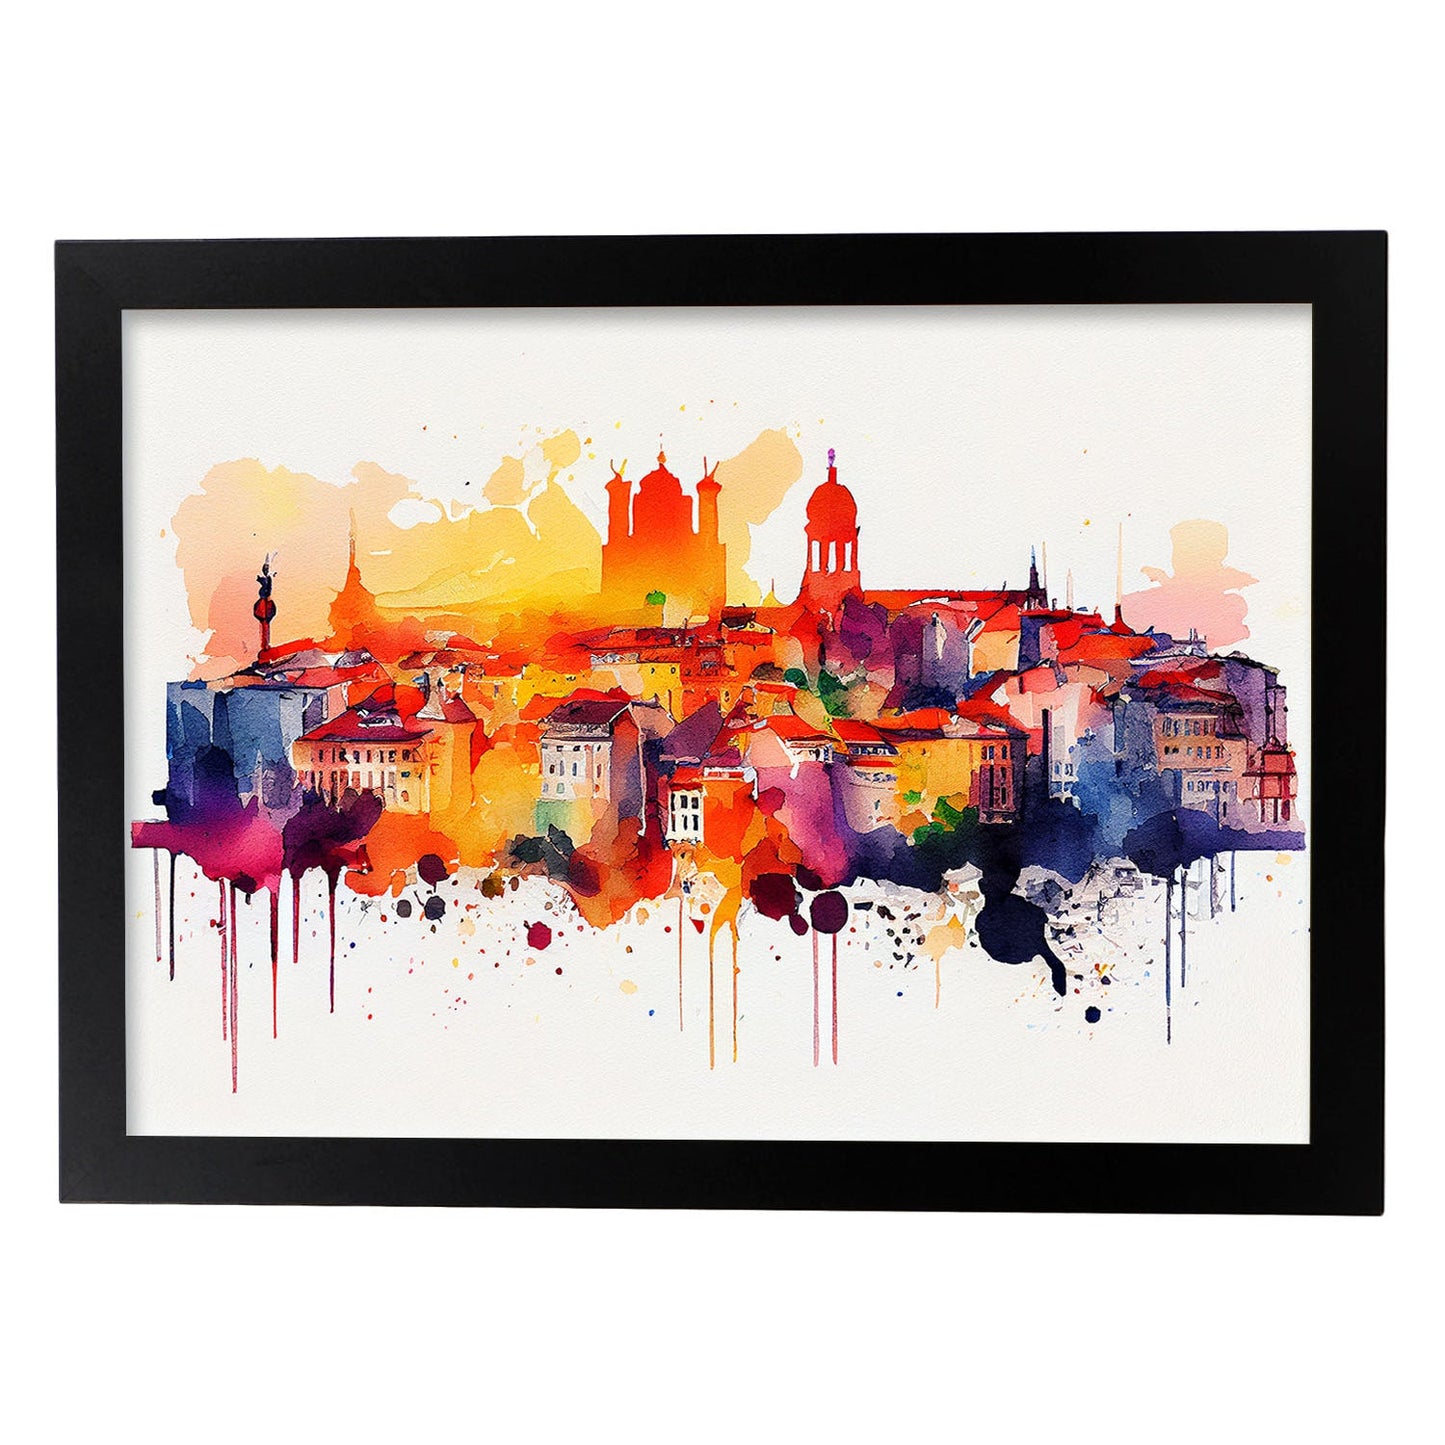 Nacnic watercolor of a skyline of the city of Lisbon_1. Aesthetic Wall Art Prints for Bedroom or Living Room Design.